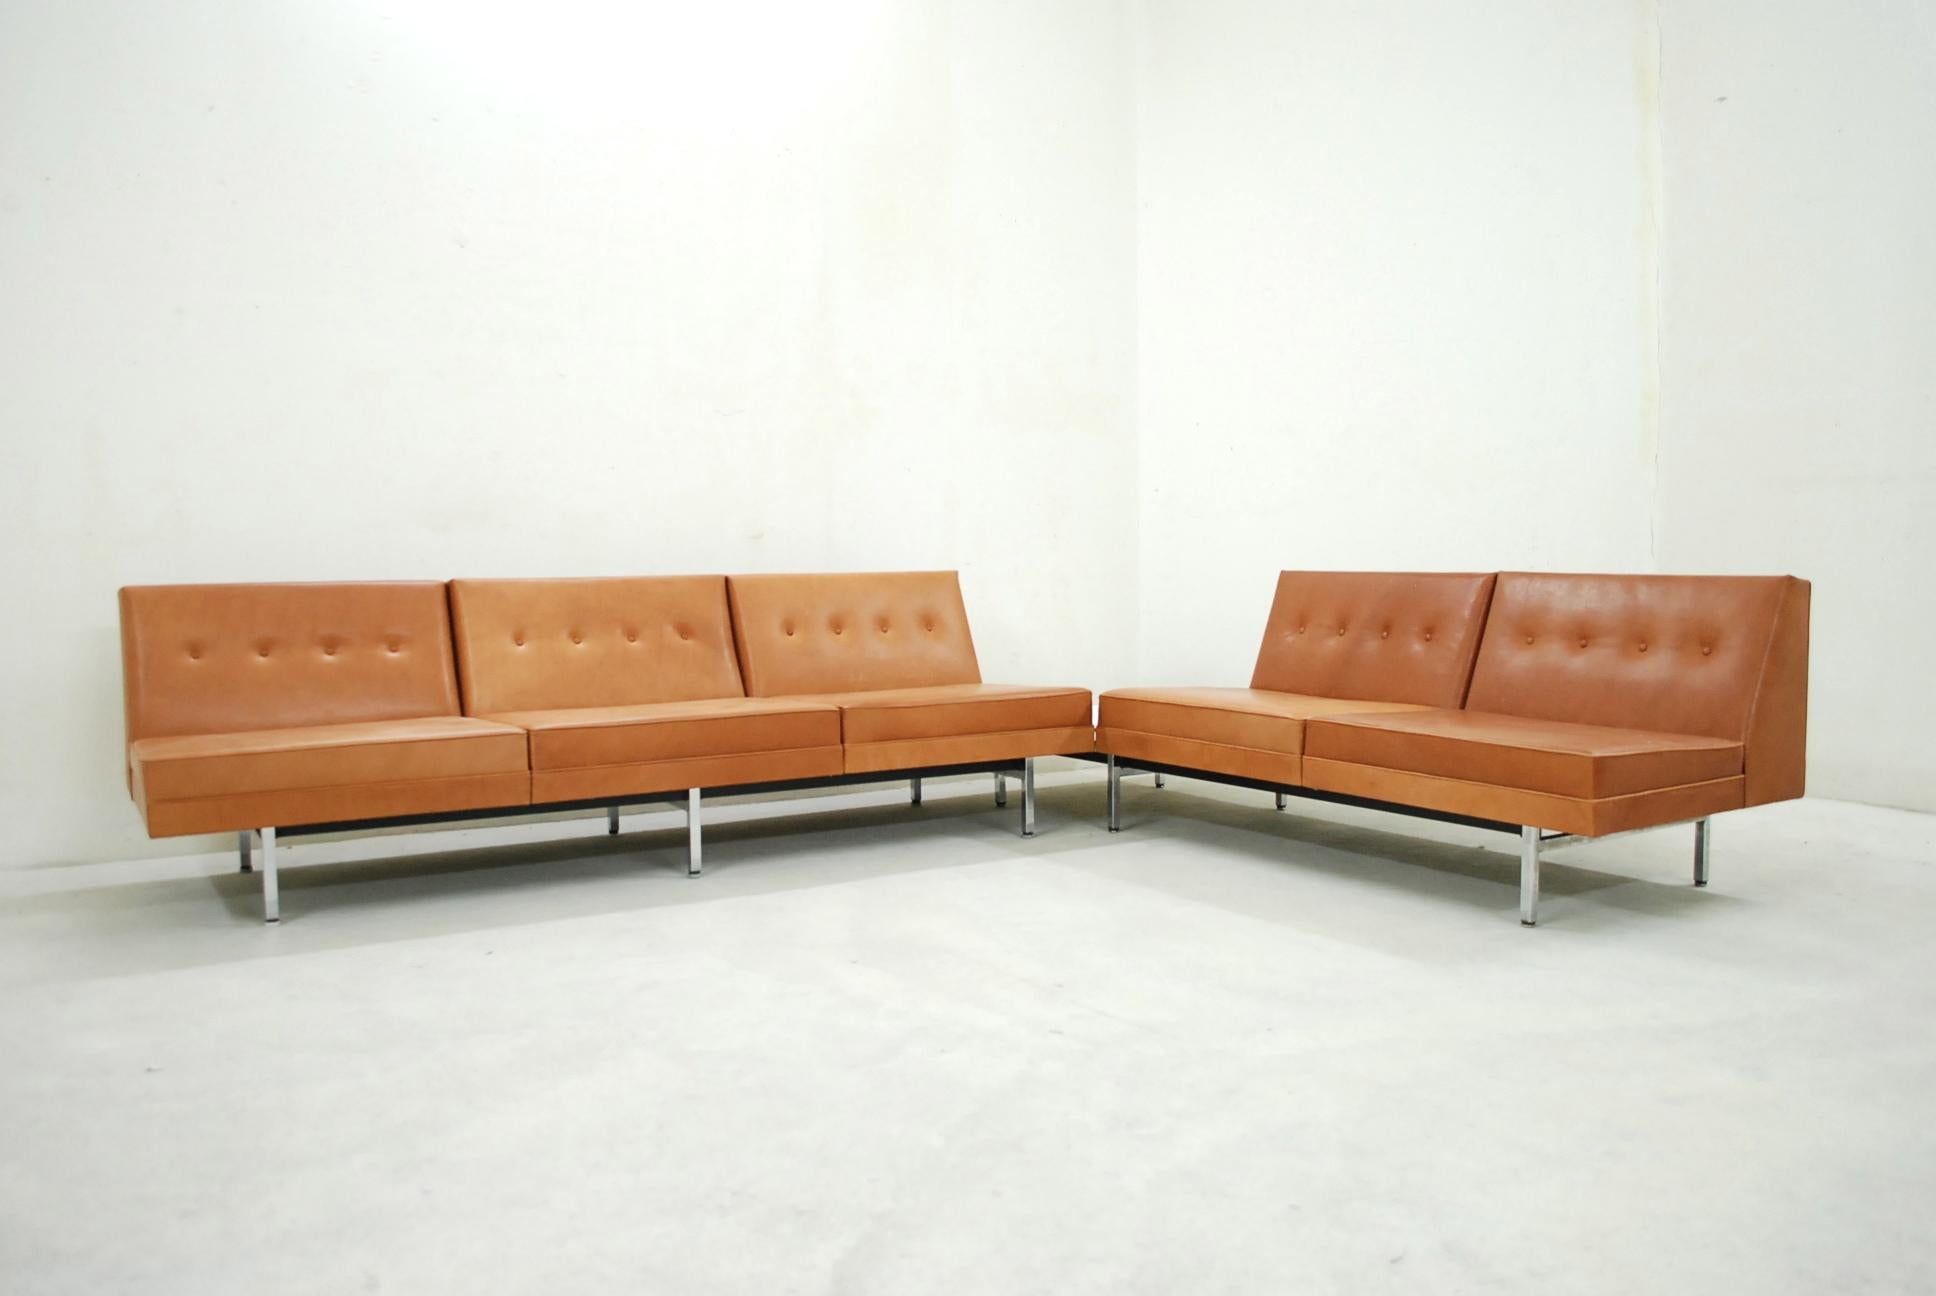 This living room set model modular sofa was designed by George Nelson for Herman Miller.
This set was completely re -upholstered in high premium cognac Natural leather.
It has a soft leather touch.
The frame is made of chrome steel and black